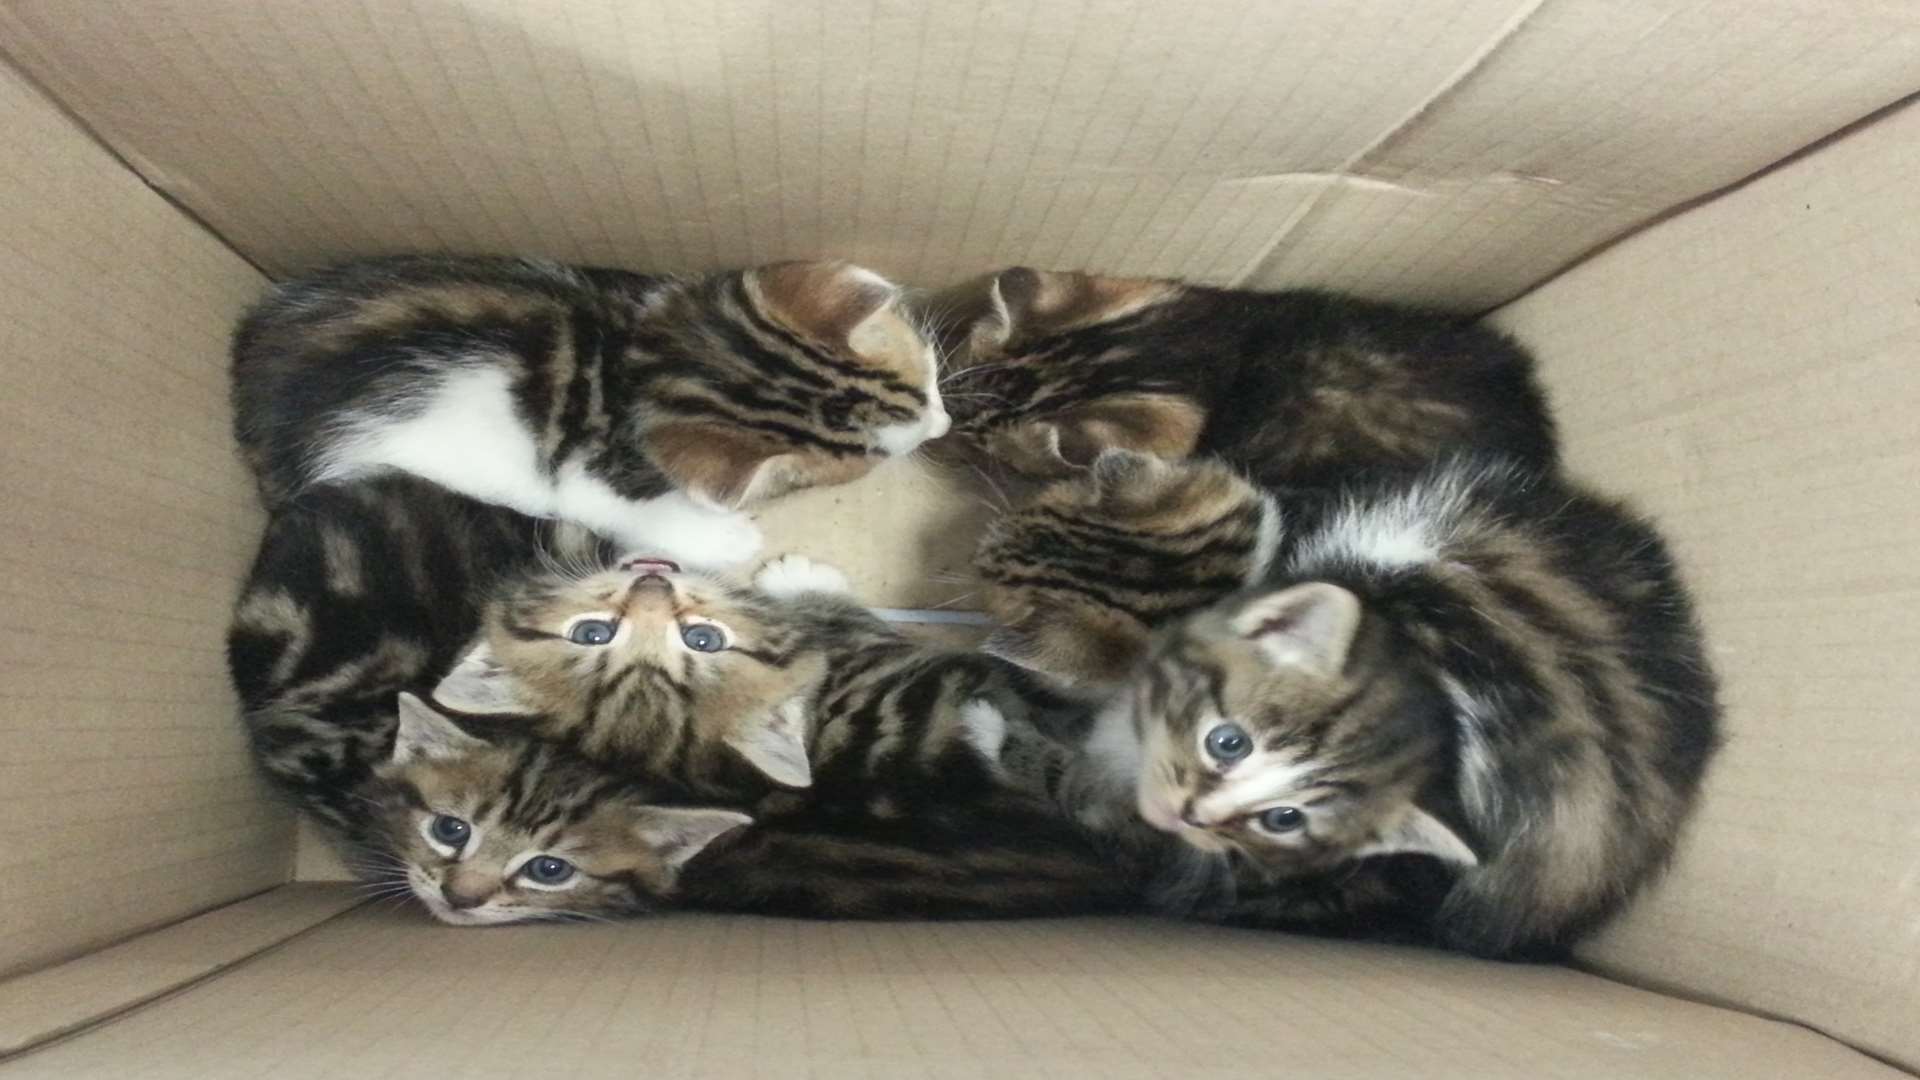 The kittens were dumped in a cardboard box at Ranscombe Farm Nature Reserve. Pic: RSPCA